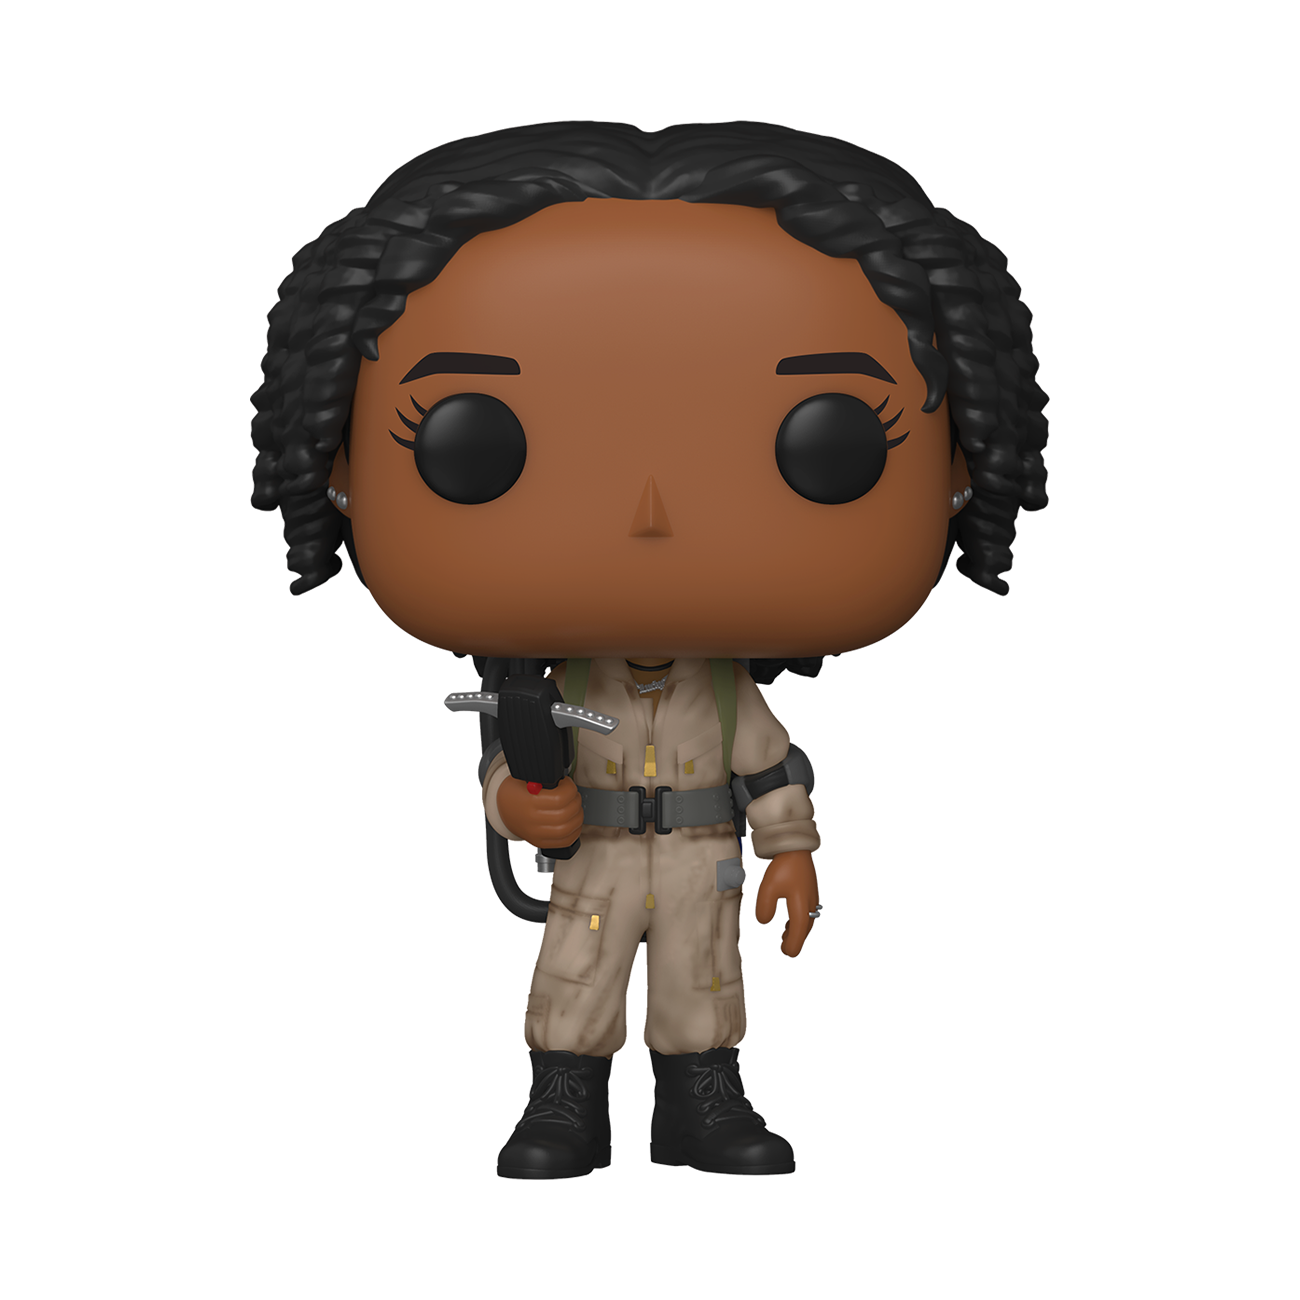 Pop! Movies: Ghostbusters Afterlife - Lucky